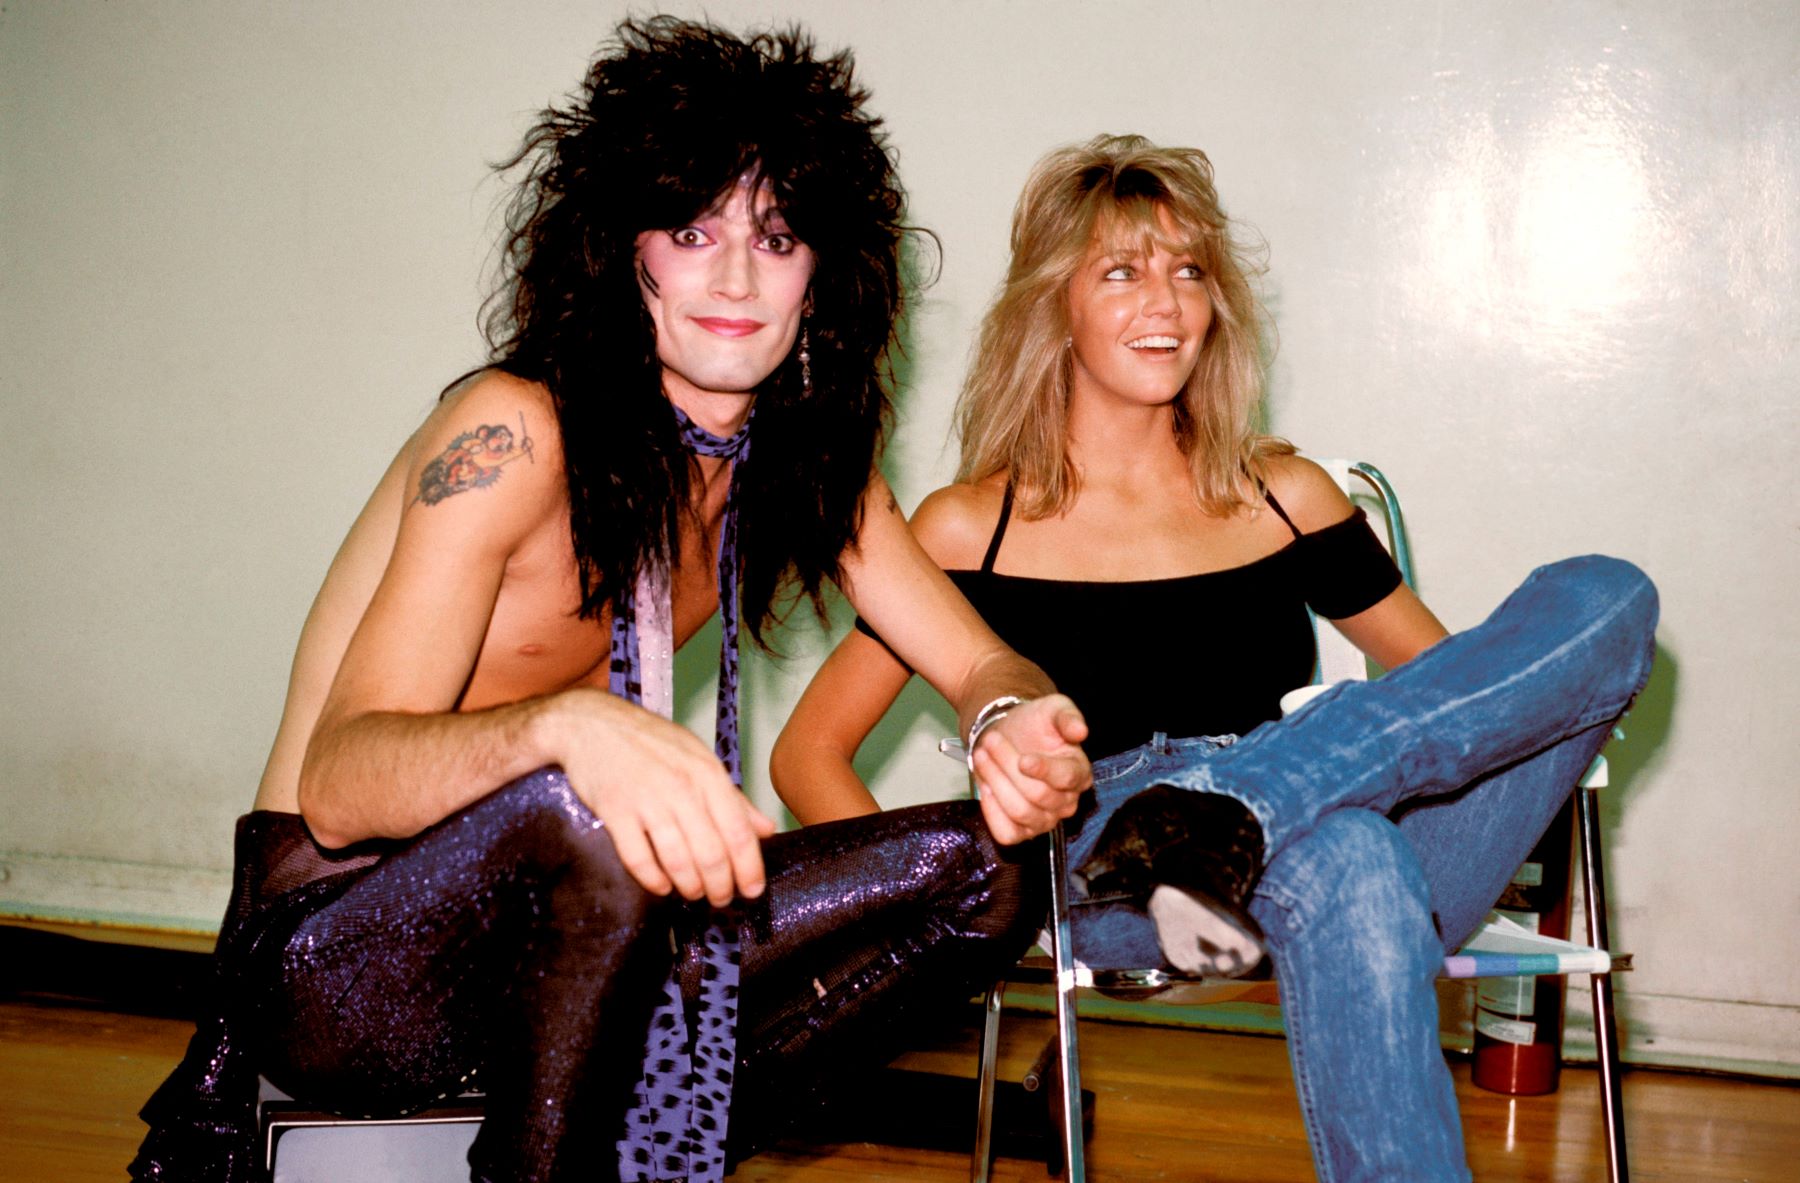 Tommy Lee of Motley Crue with his wife Heather Locklear